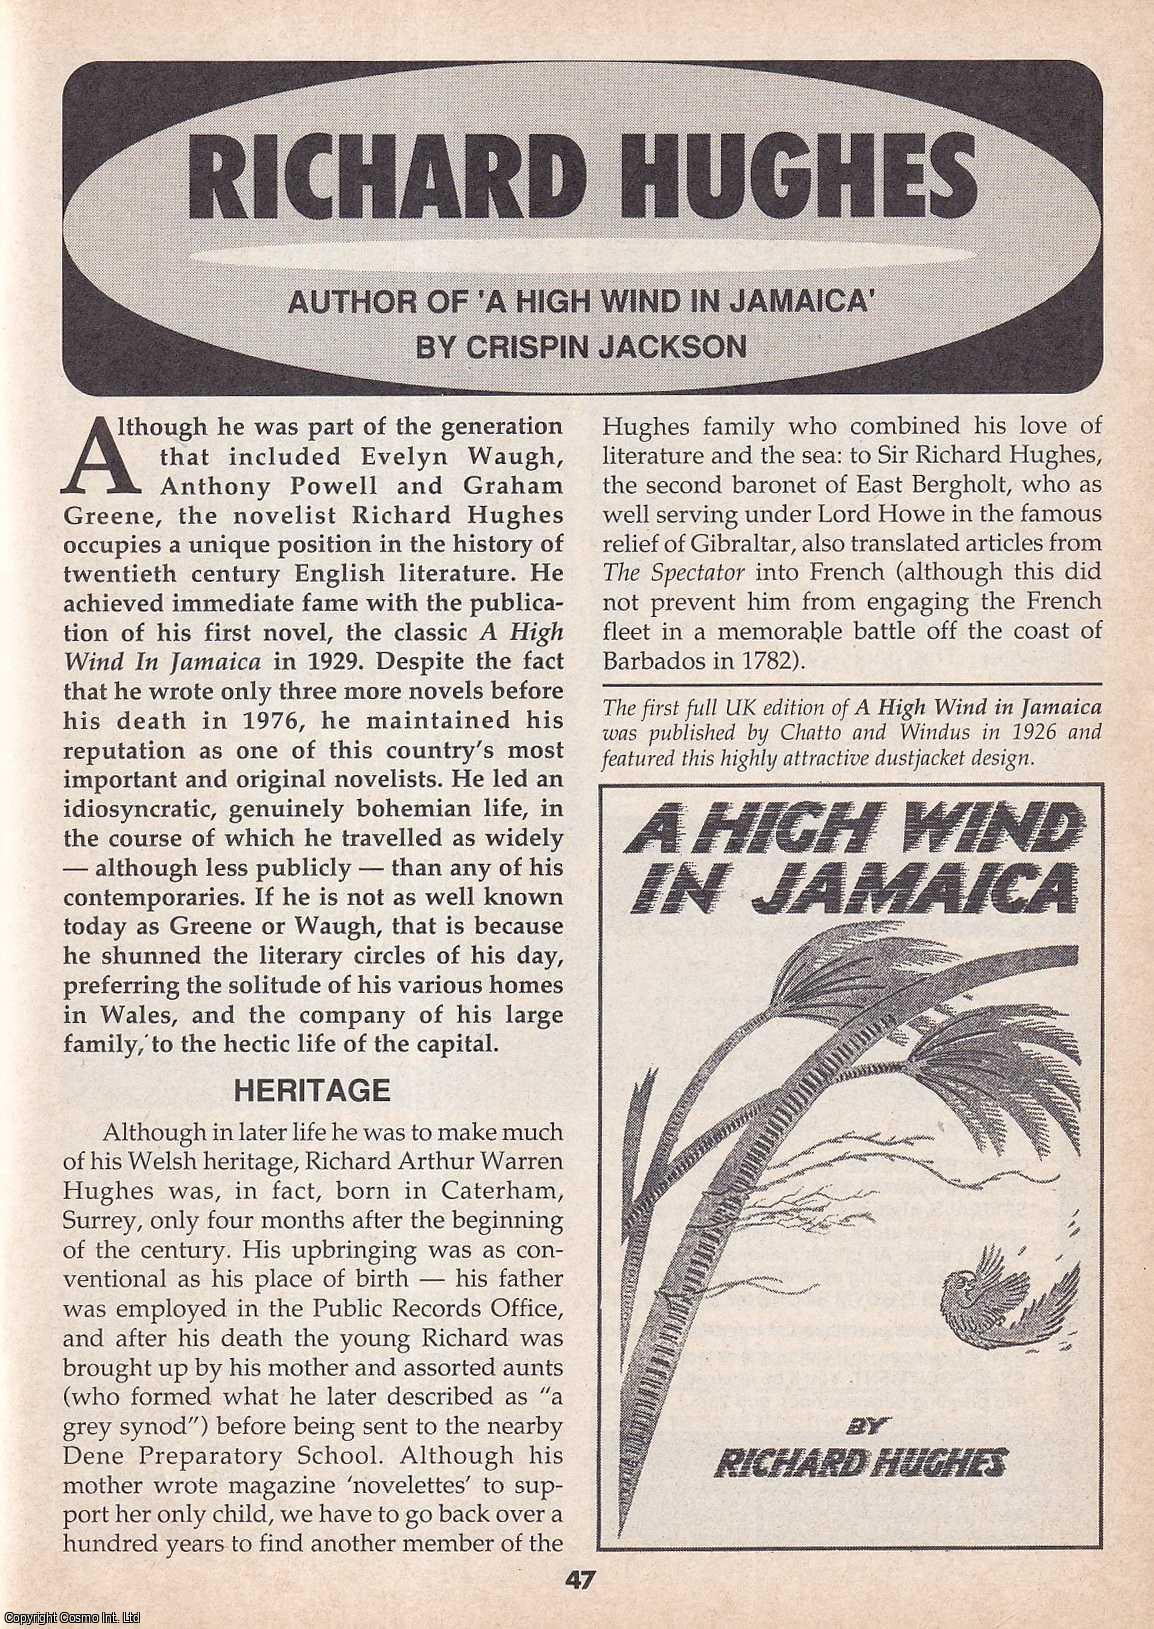 Crispin Jackson - Richard Hughes. This is an original article separated from an issue of The Book & Magazine Collector publication.